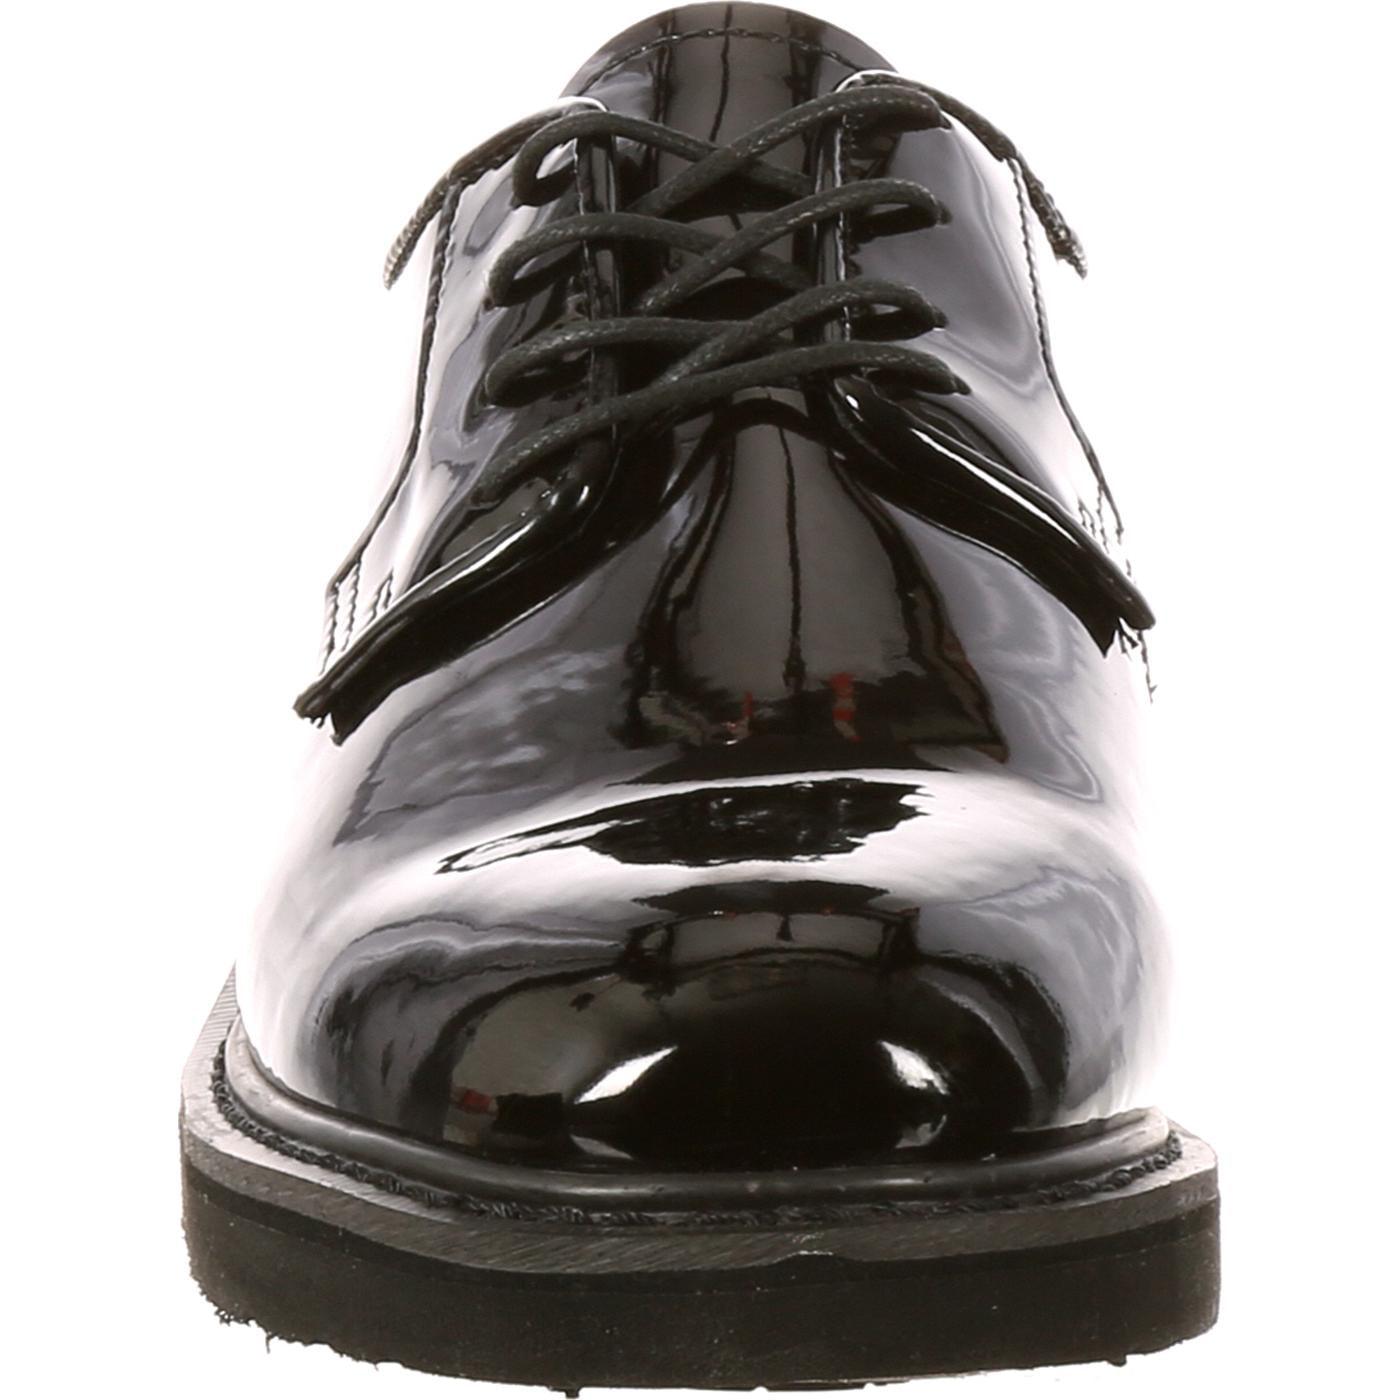 Rocky High-Gloss Dress Leather Oxford Shoe - Flyclothing LLC